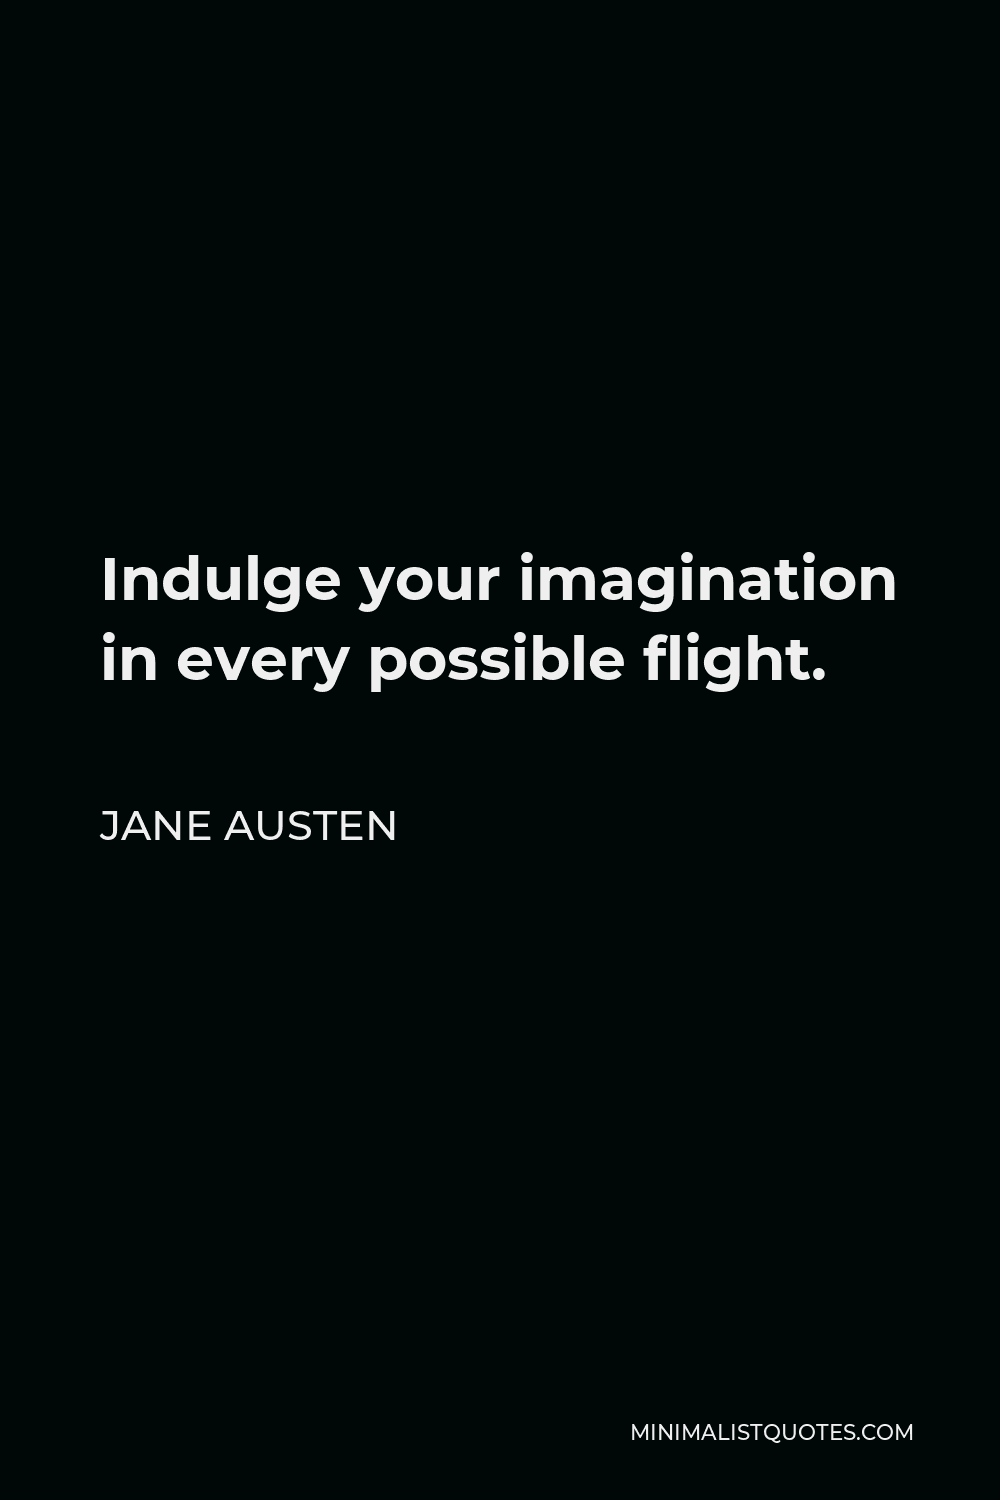 Jane Austen Quote - Indulge your imagination in every possible flight.